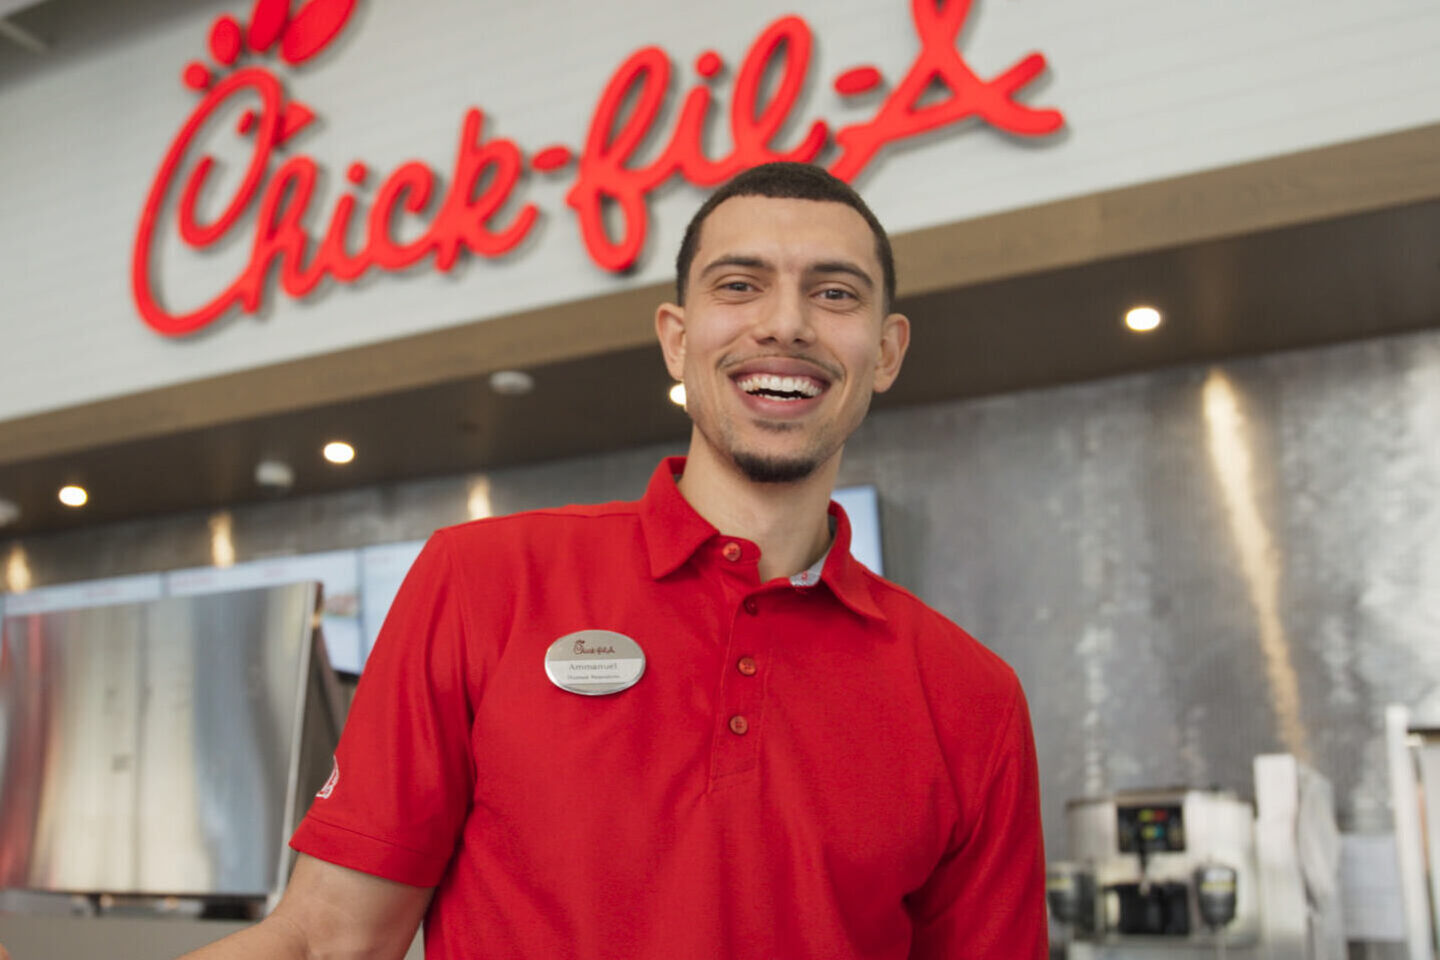 A photo of Ammanuel, Canada’s first restaurant Team Member to be recognized as a Chick-fil-A True Inspiration Scholar.